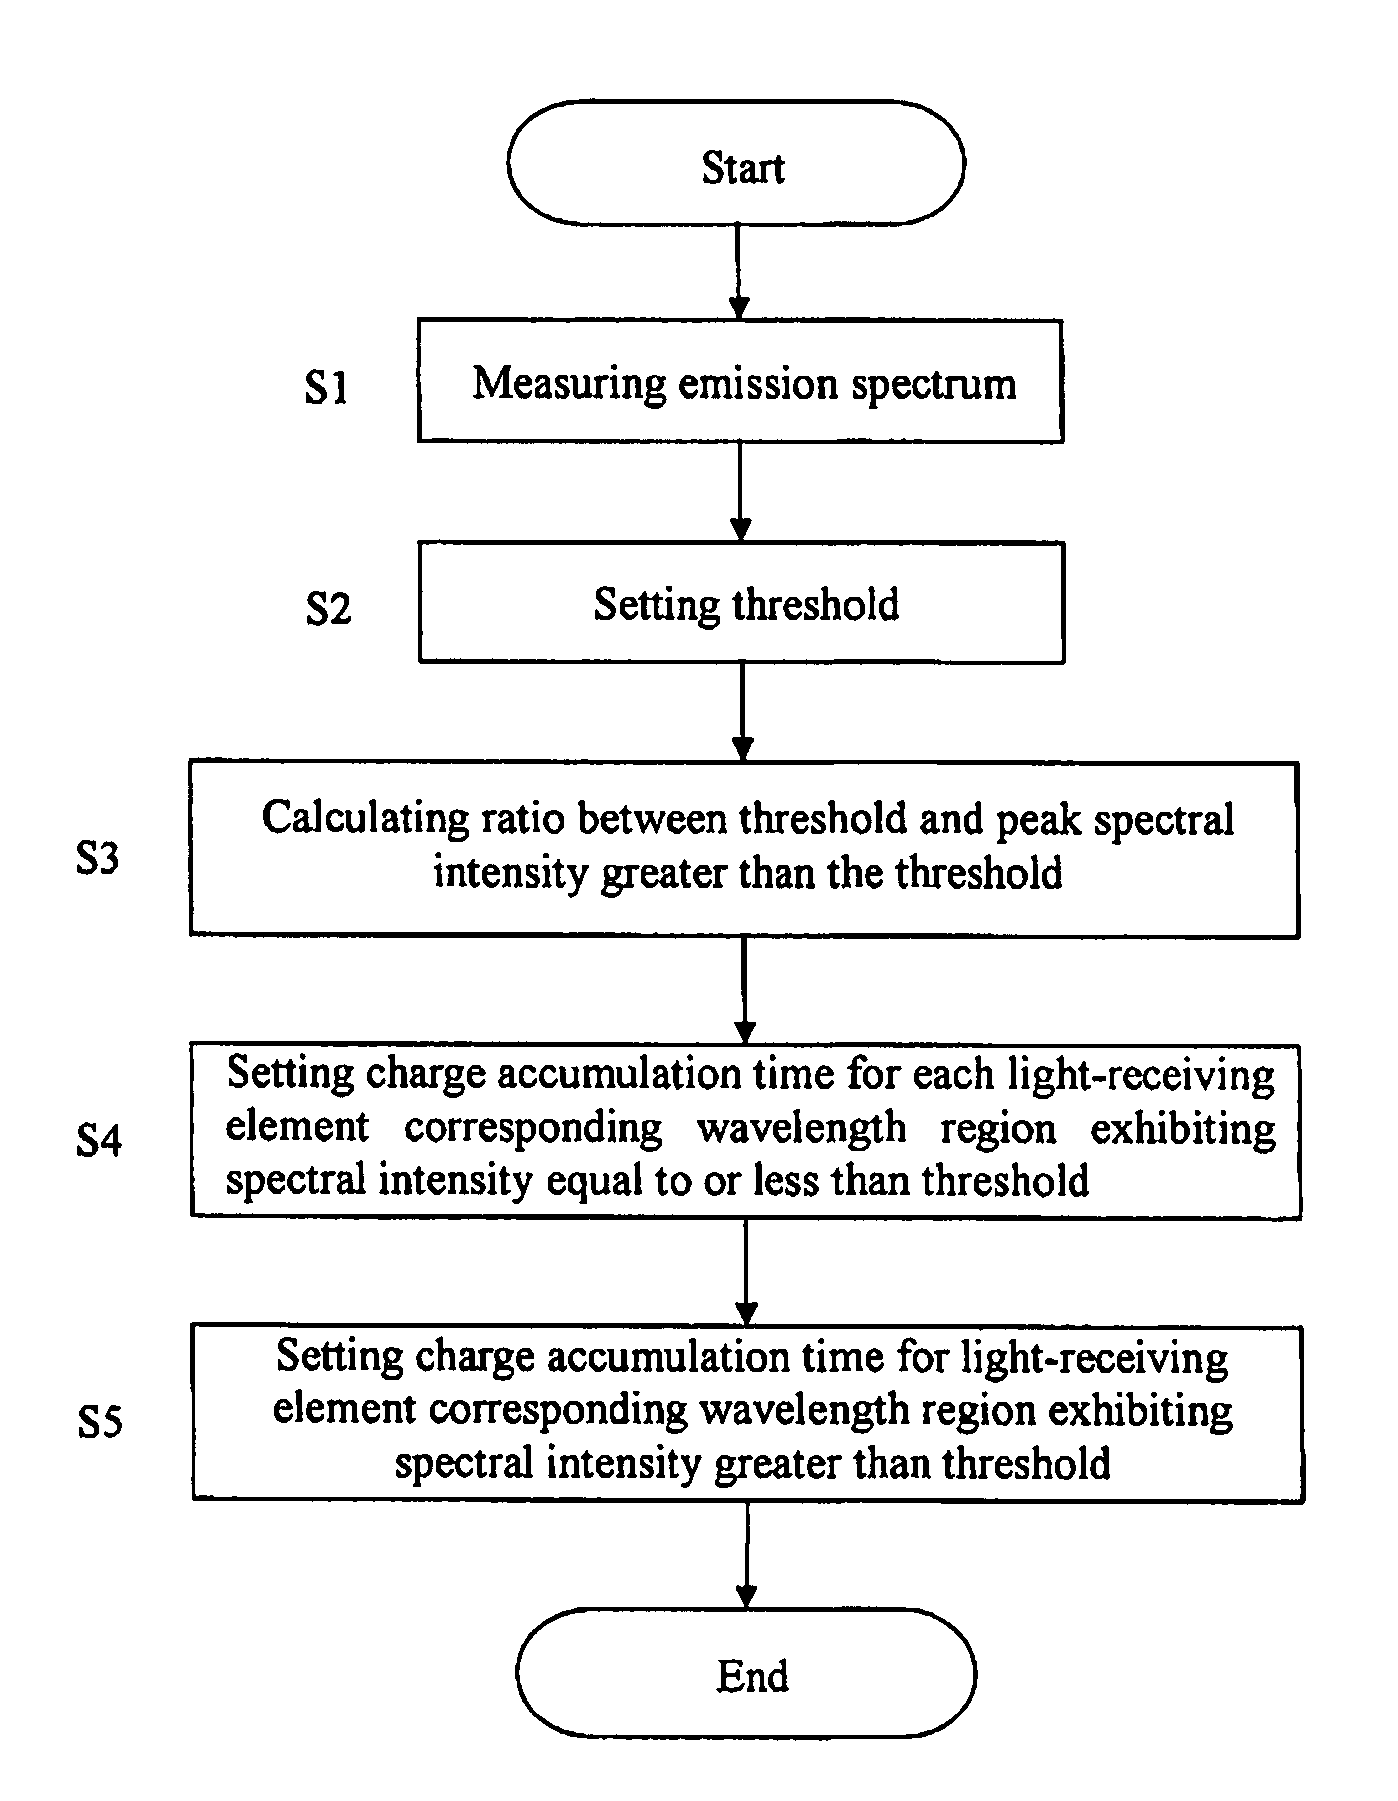 Spectrophotometer with optical system for spectrally dispersing measurement light and photodiode array